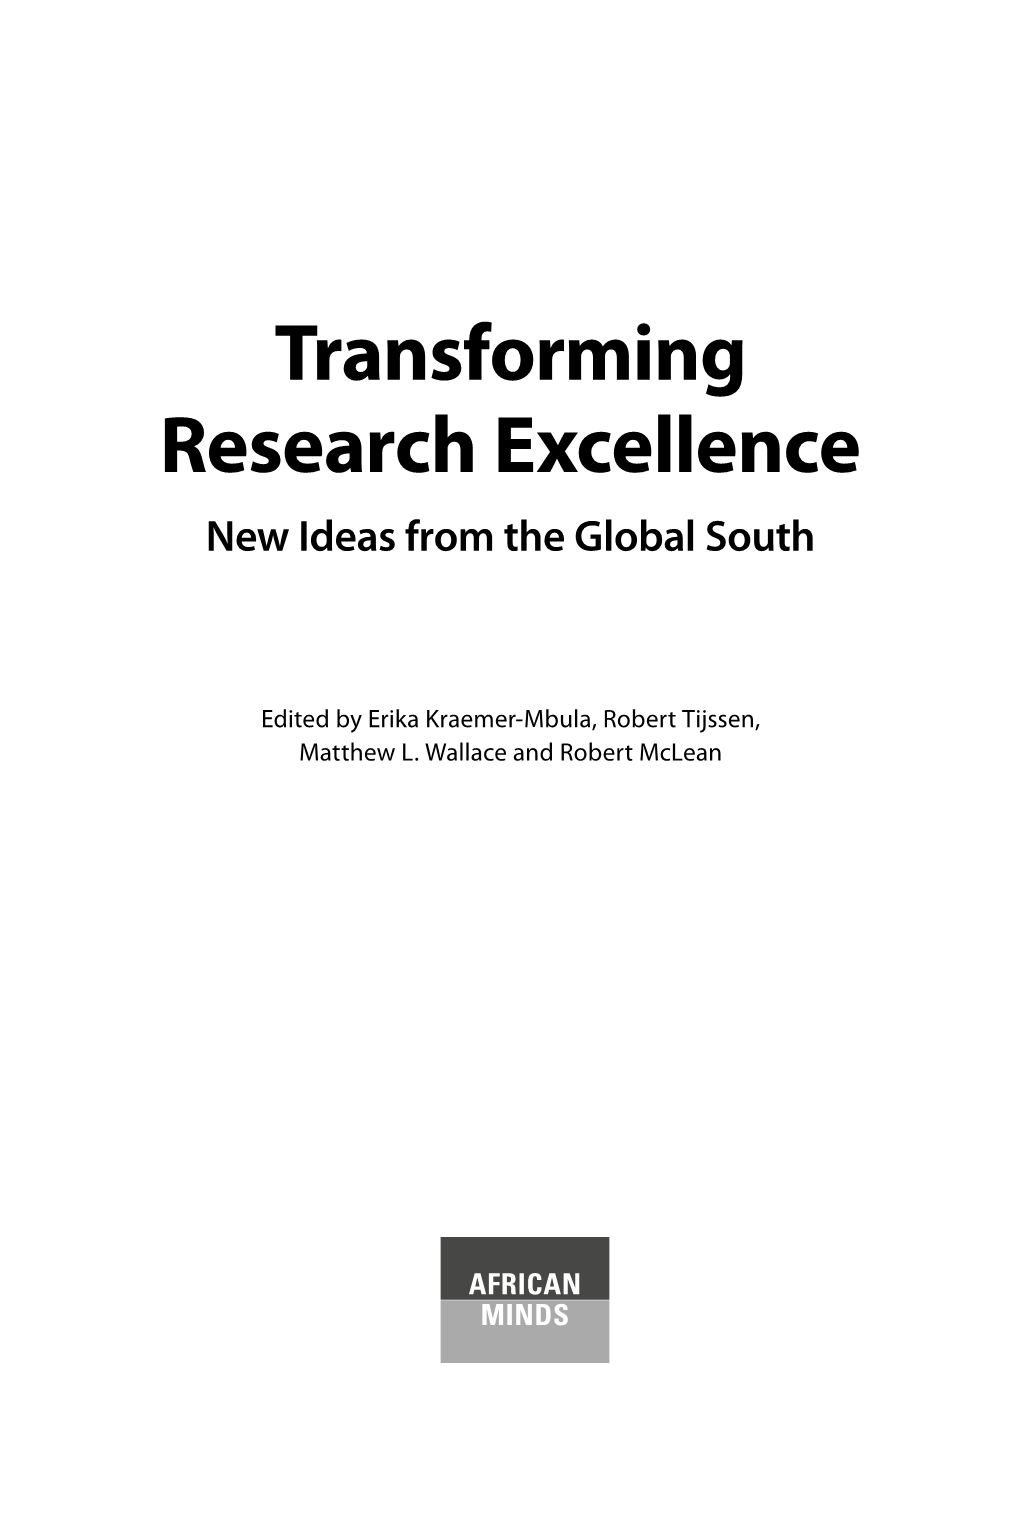 Transforming Research Excellence New Ideas from the Global South